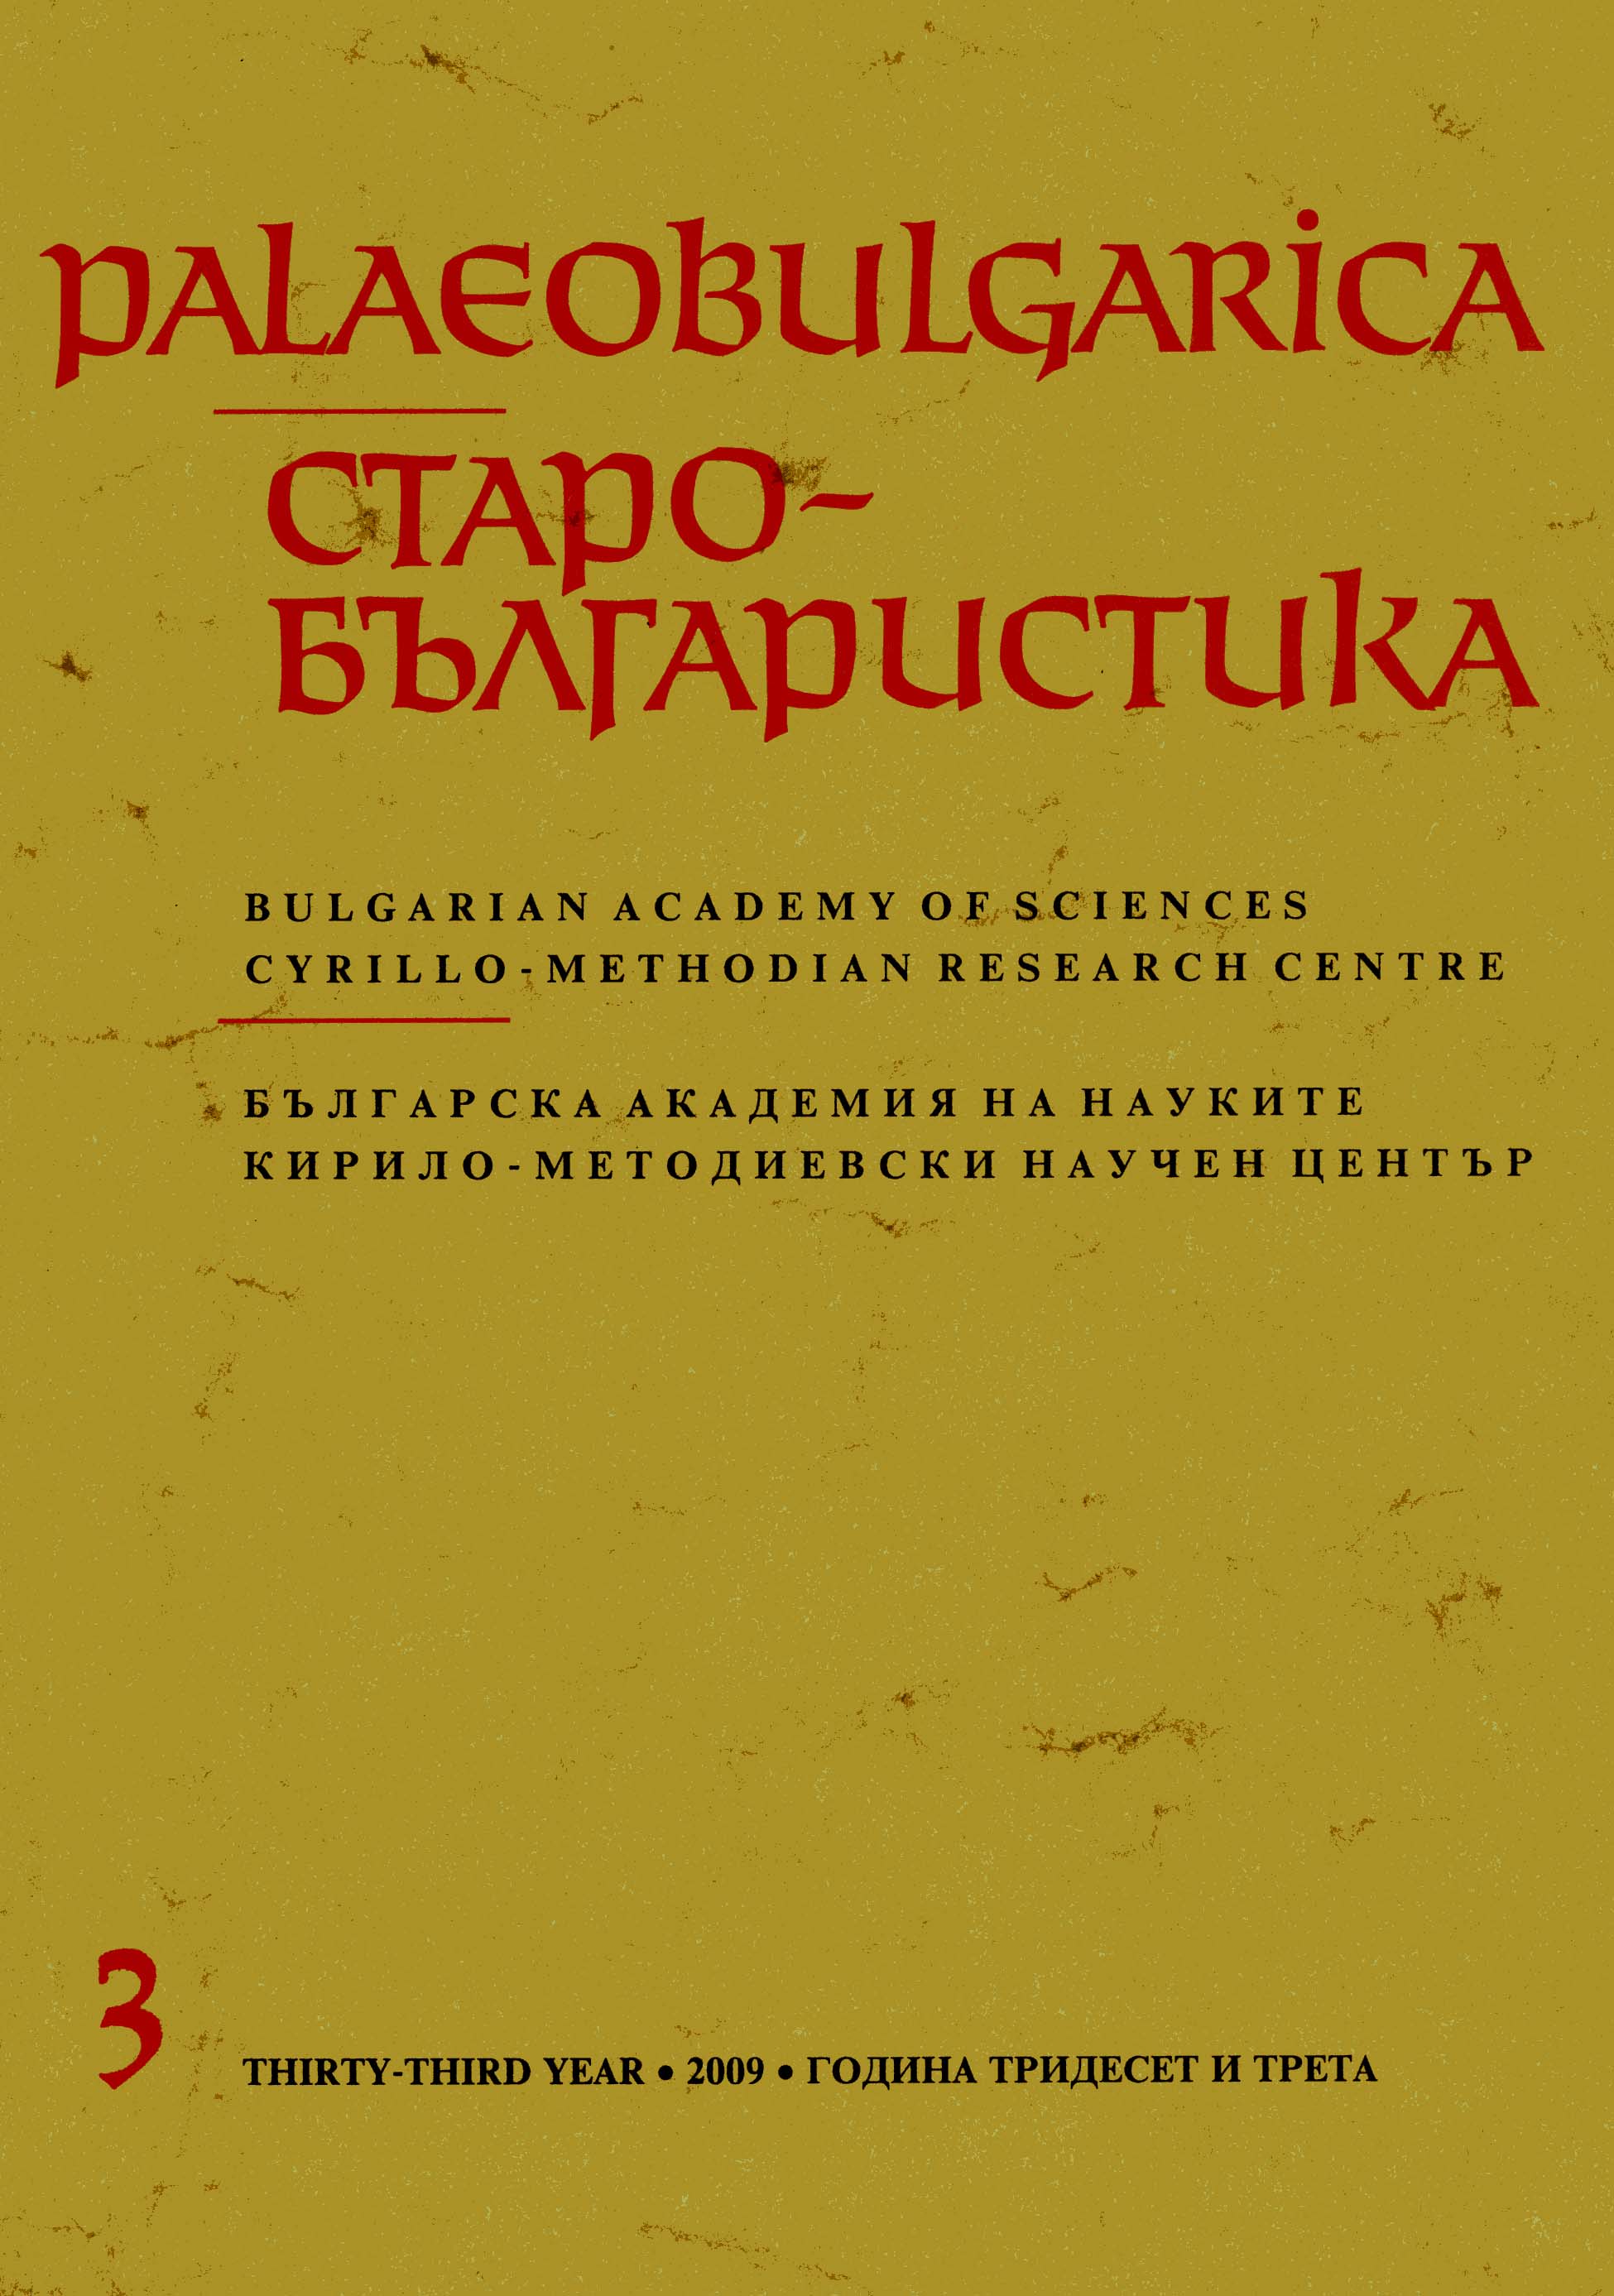 International Scientific Conference “Biblical Translations in the Slavonic Tradition and the Cyrillo-Methodian Sources” Cover Image